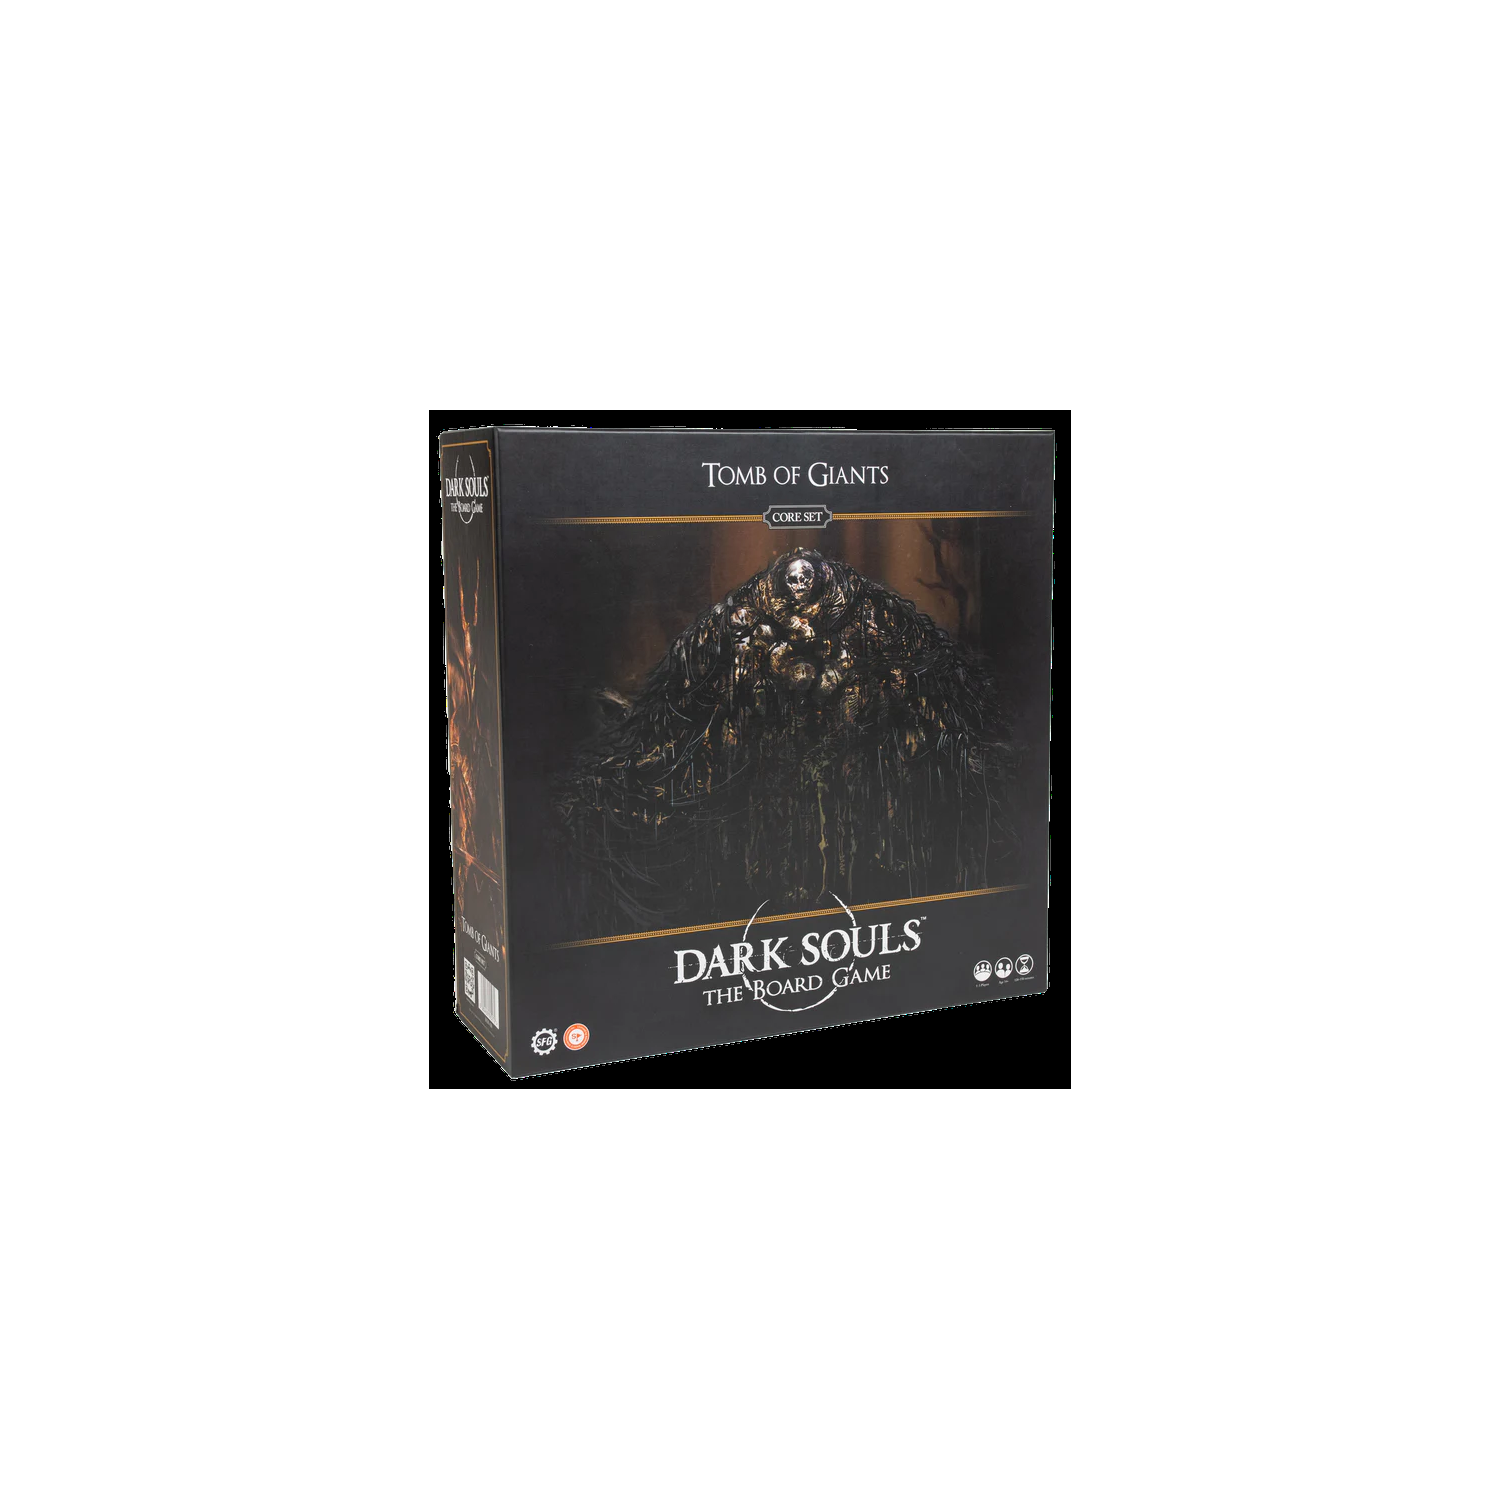 Steamforged Games Dark Souls: The Board Game - Tomb of Giants 1-4 players, ages 14+, 90-120 minutes